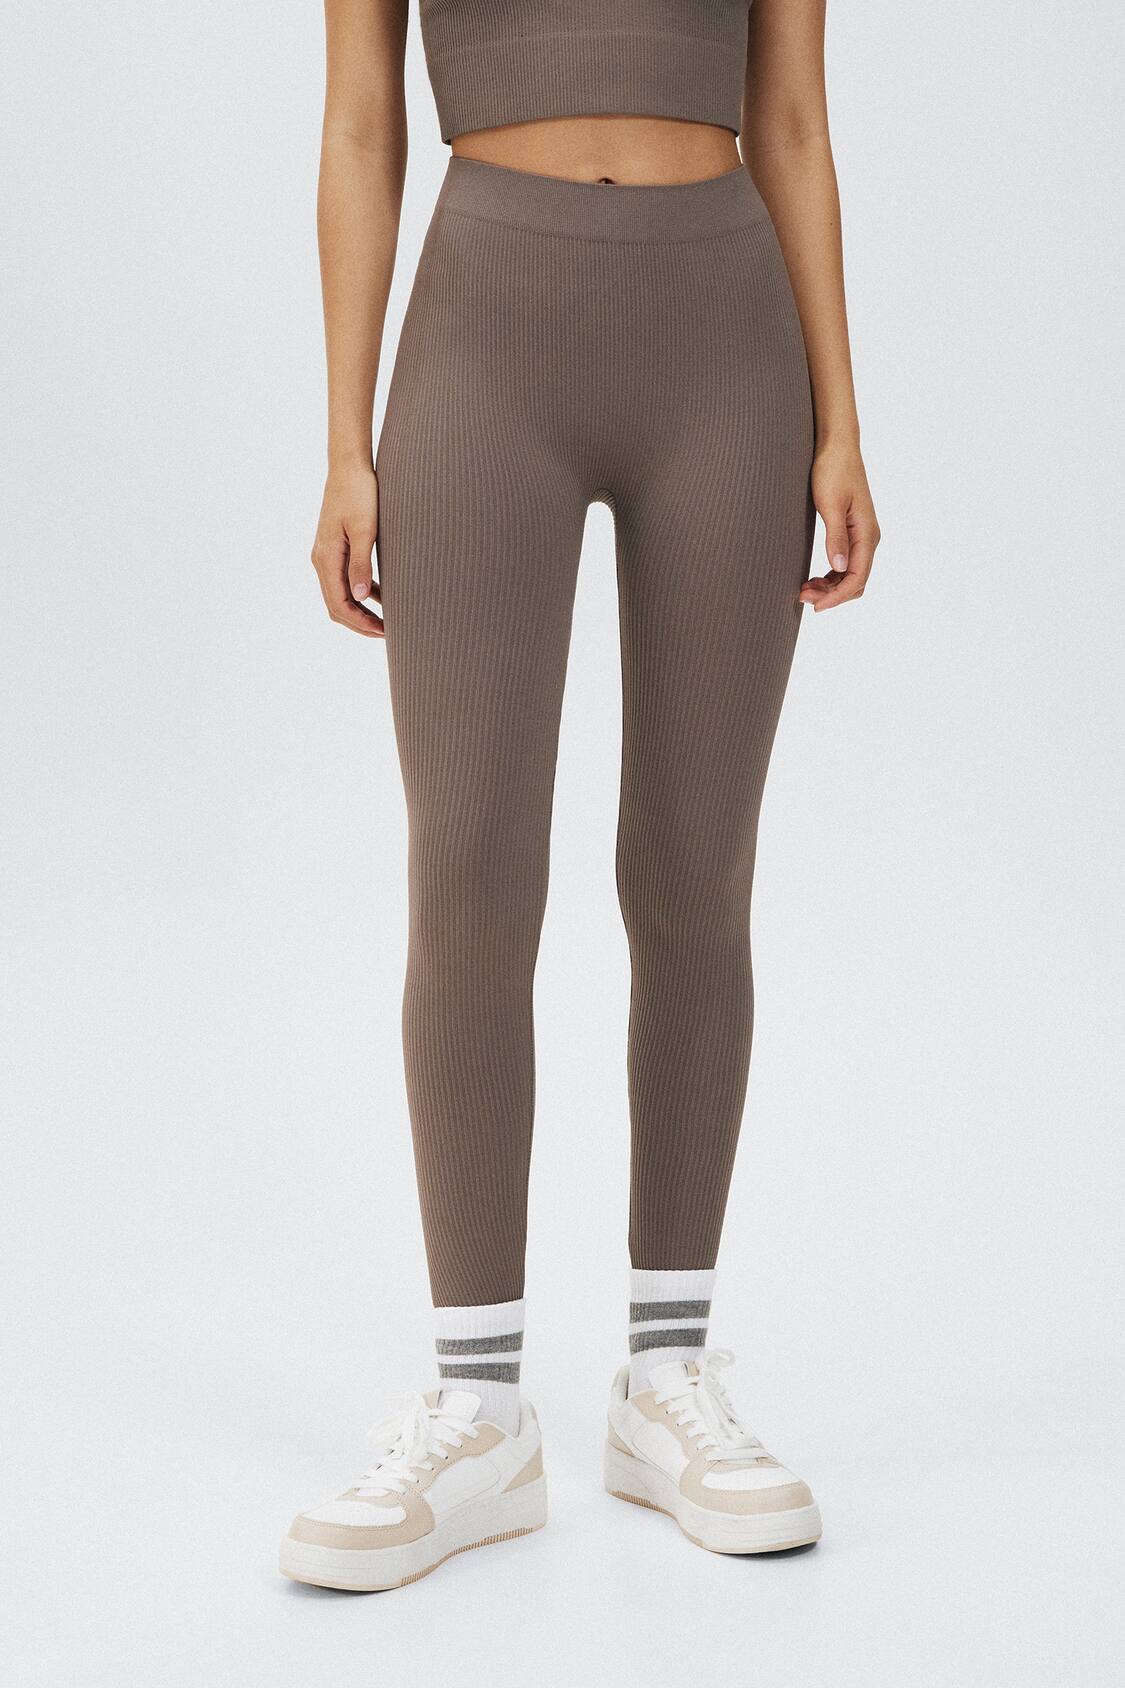 Basic Seamless Leggings from Pull and Bear on 21 Buttons